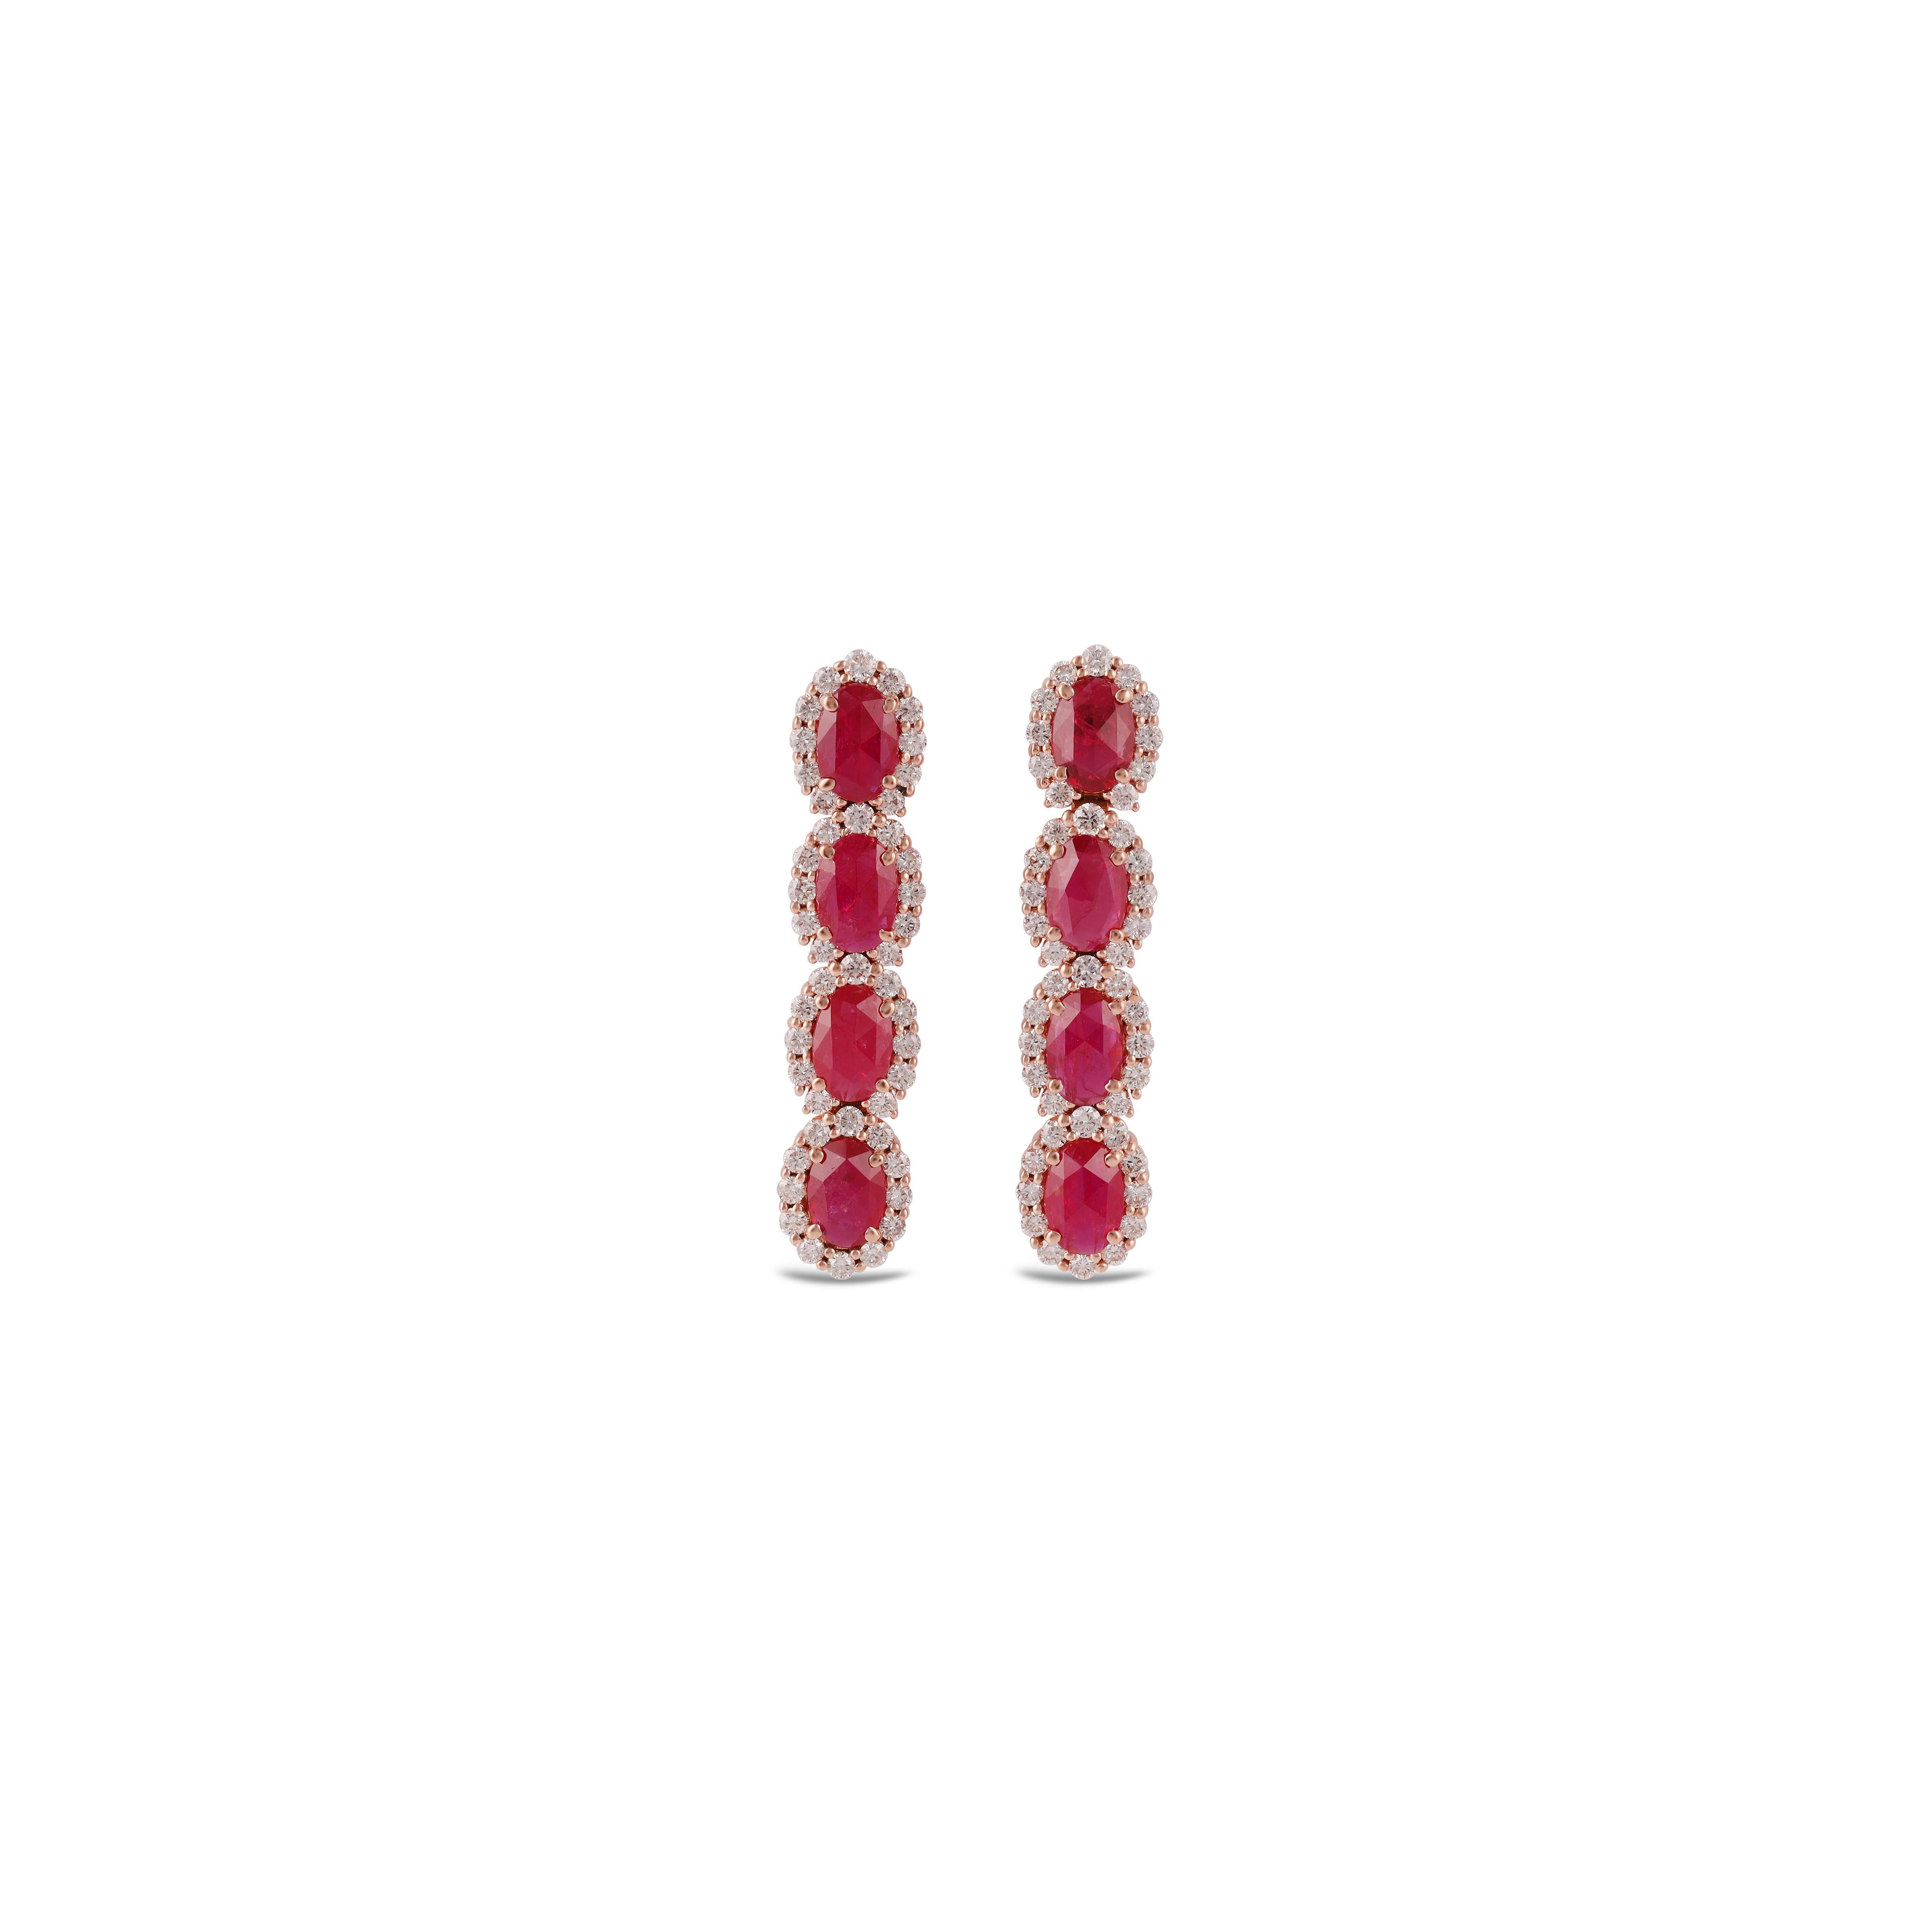 Magnificent Ruby and Diamond Earrings Studded in 18 Karat Rose Gold

These are an exclusive earrings with ruby & diamonds features 8 pieces of rubies weight 3.06 carats, surrounded with 90 pieces of diamonds weight 1.05 carats, these entire earrings